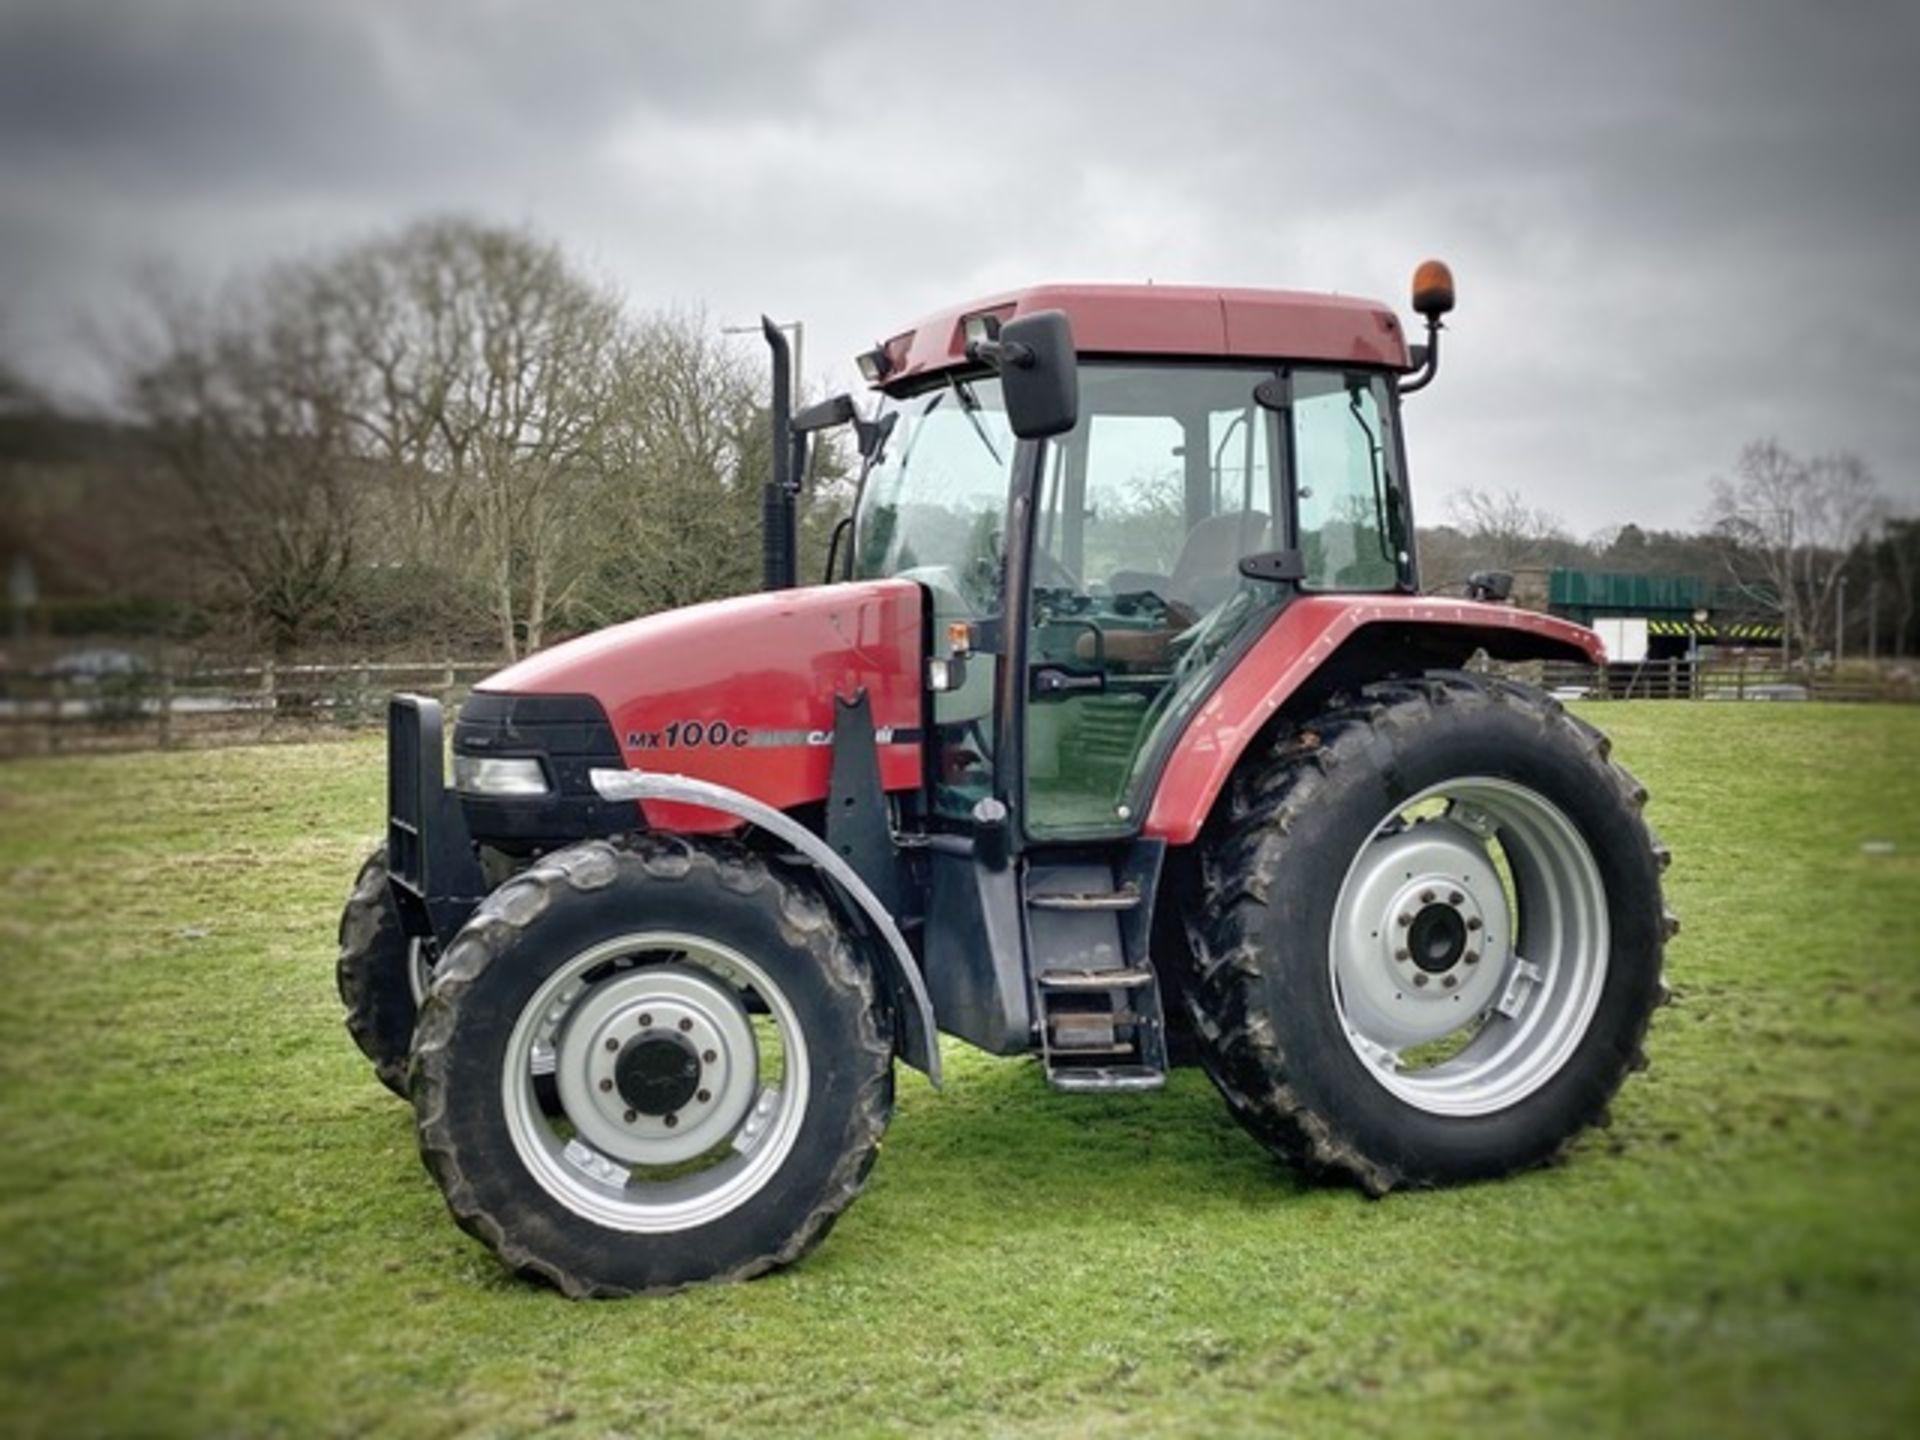 CASE IH MAXXUM MX 100c TRACTOR, LOW HOURS, RECENT SERVICE, STARTS DRIVES AND RUNS AS IT SHOULD - Image 3 of 17